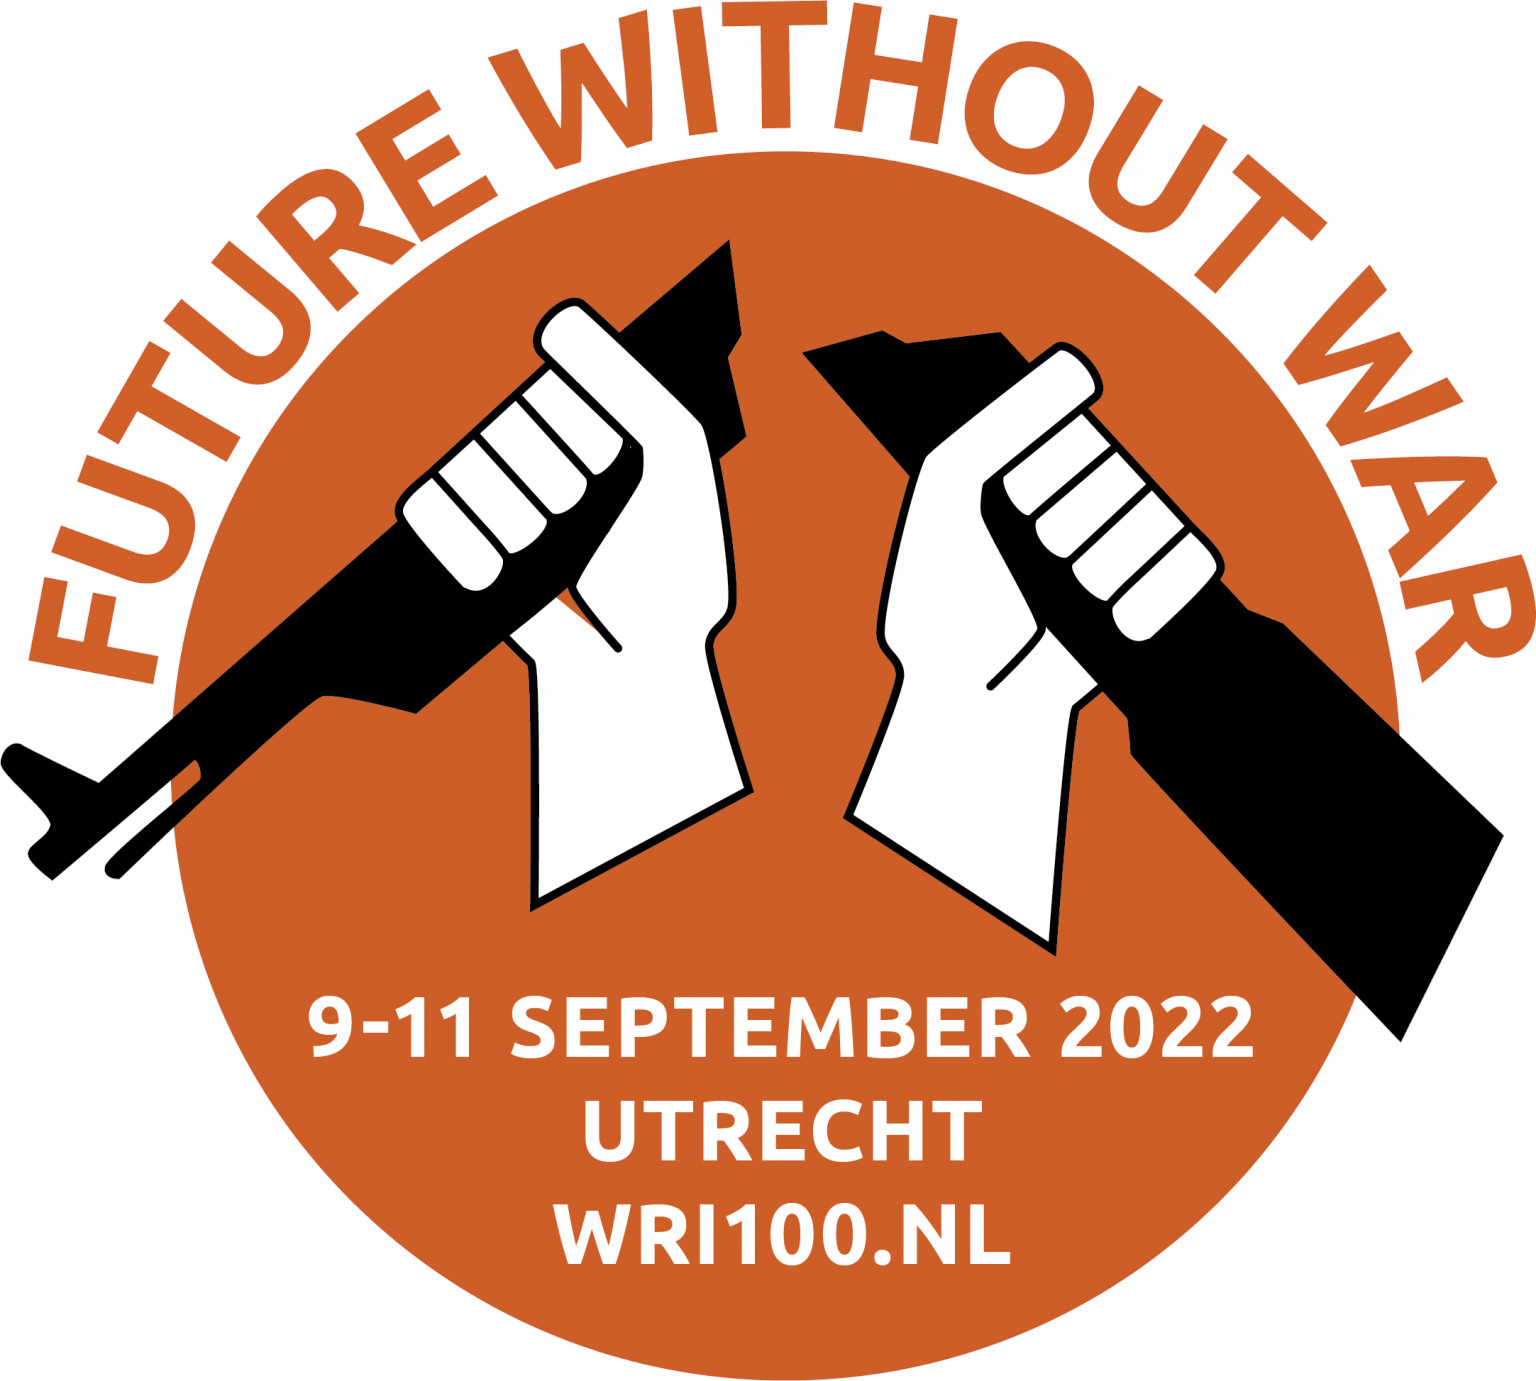 Future without War